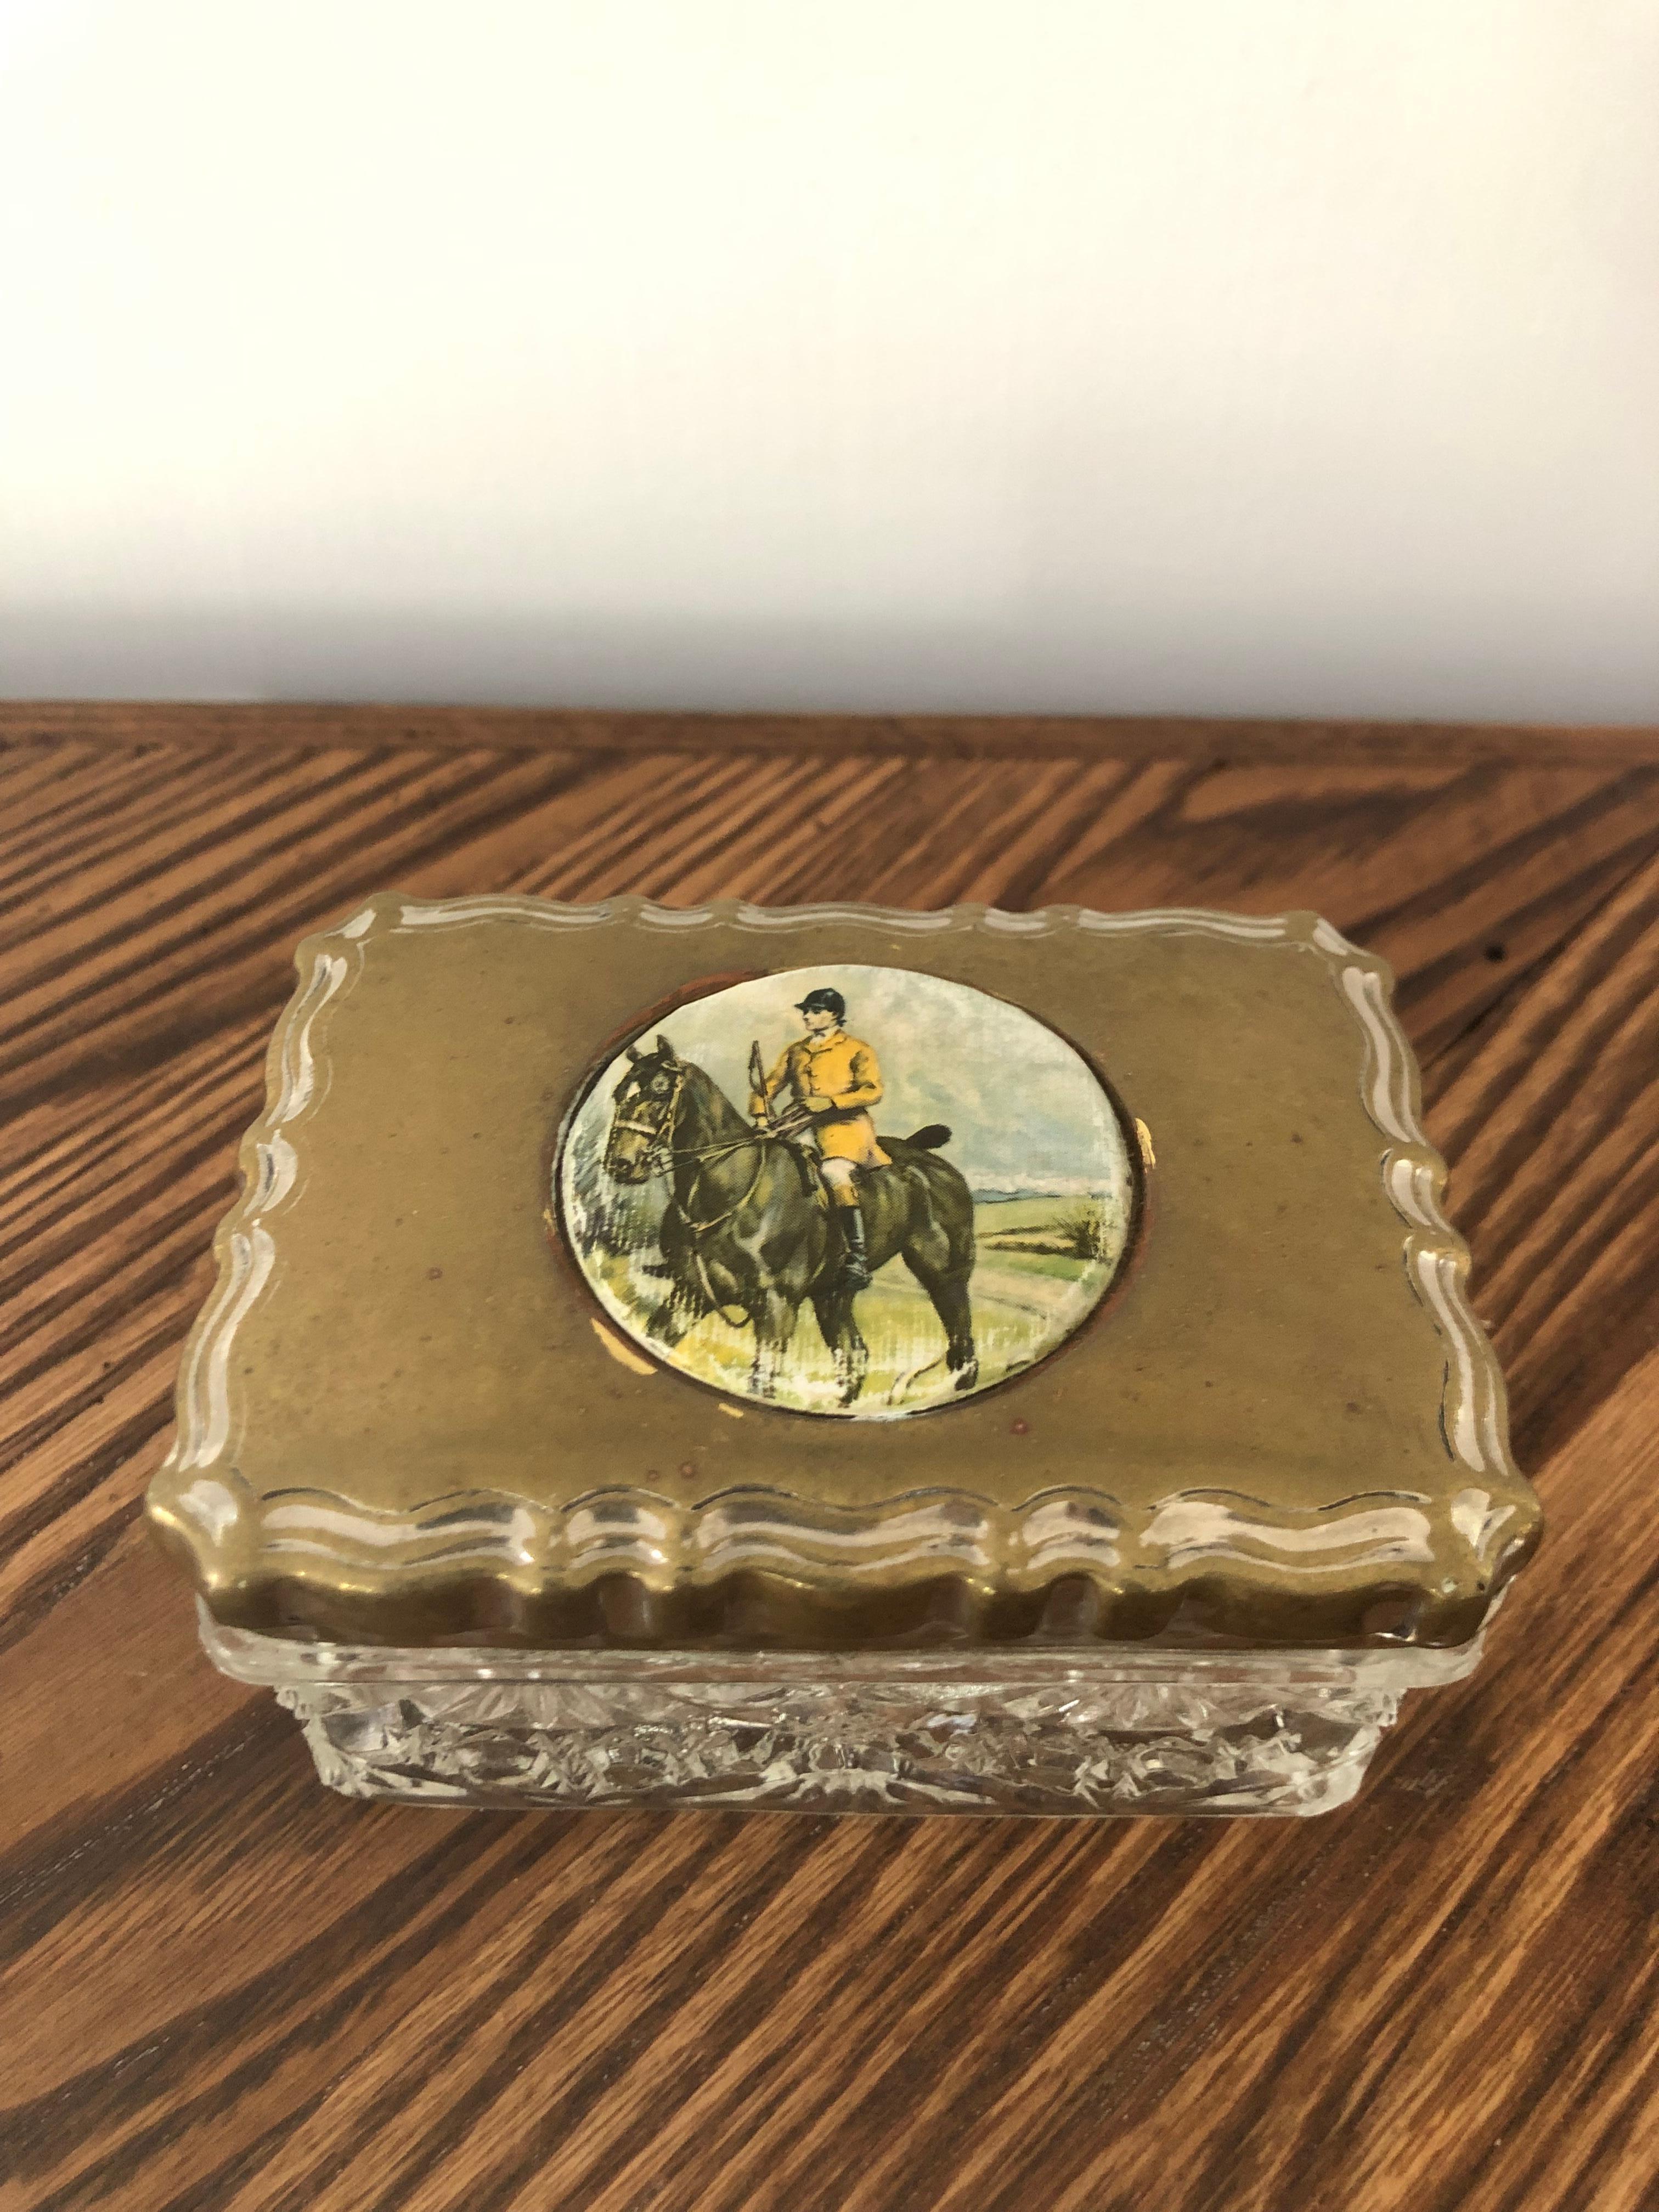 Early 20th century crystal dresser box with a hunting scene painted on a brass lid. This crystal box is a nice size and good quality that would look great on any dresser. Its from a private collector who traveled the world buying beautiful pieces.